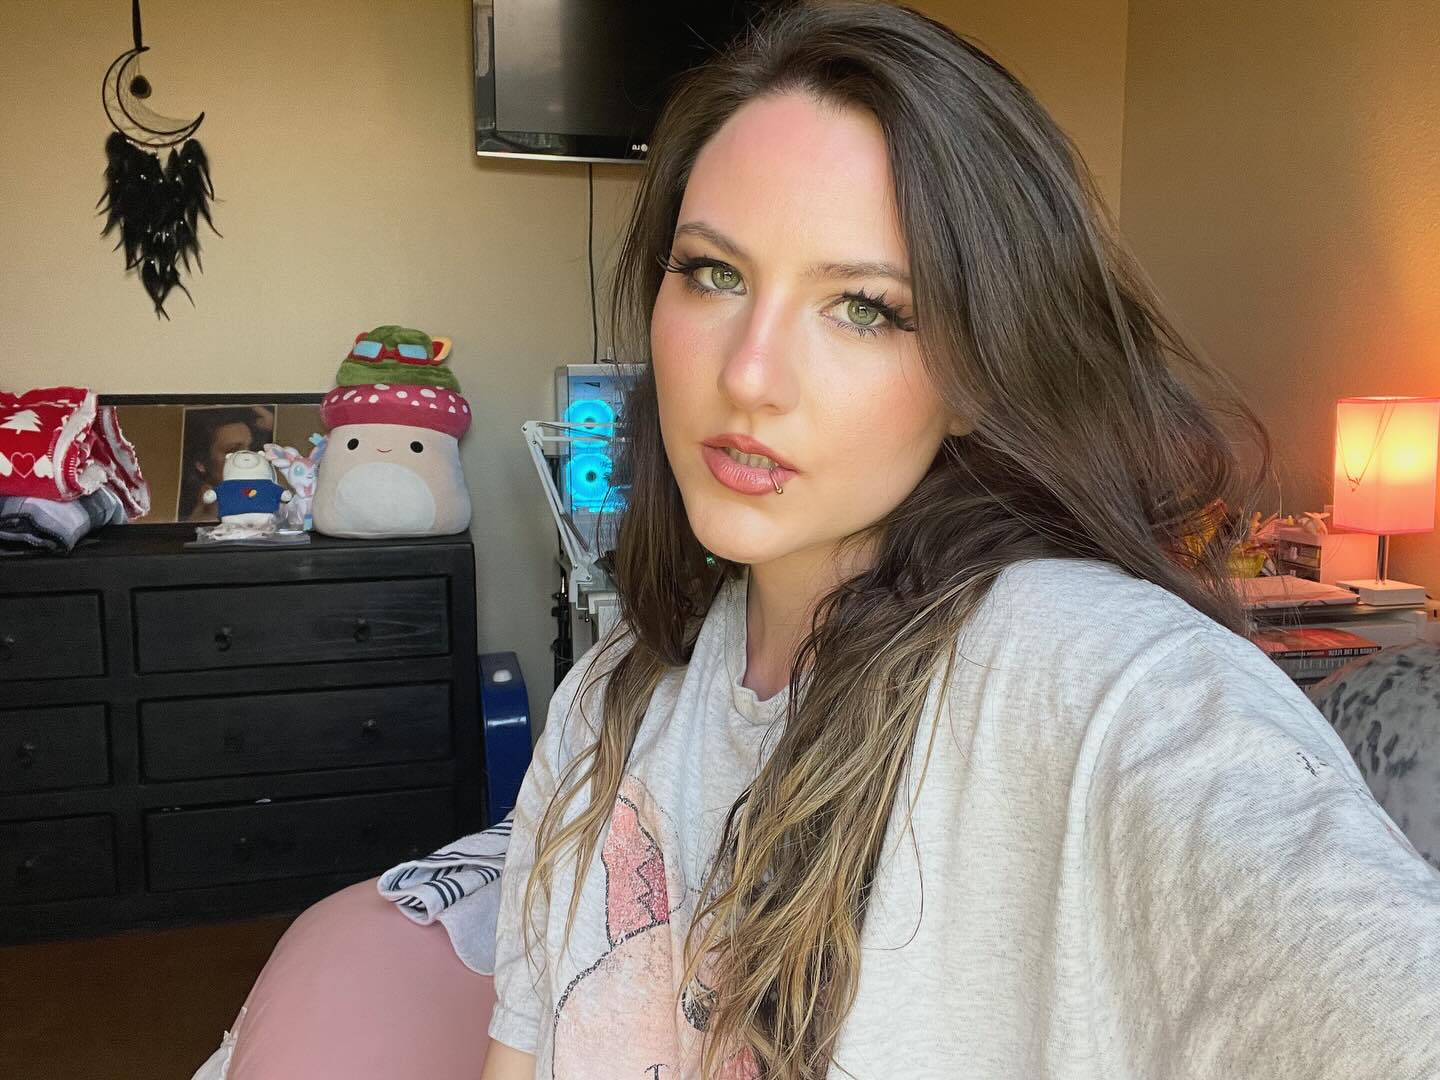 hi hi hi 👉🏻👈🏻
i couldn't decide which one to post so i posted all of them, let me know which is your favorite!
also, please ignore my sunburn :")
i'm wanting to start tanning but i've ran into some difficulties from being a chronically online and inside egirl. it's gonna be a slow process!
-
-
-
#egirl #alt #anime #grungegirl #gothgirl #ofgirl #uwu #gamergirl #losergf